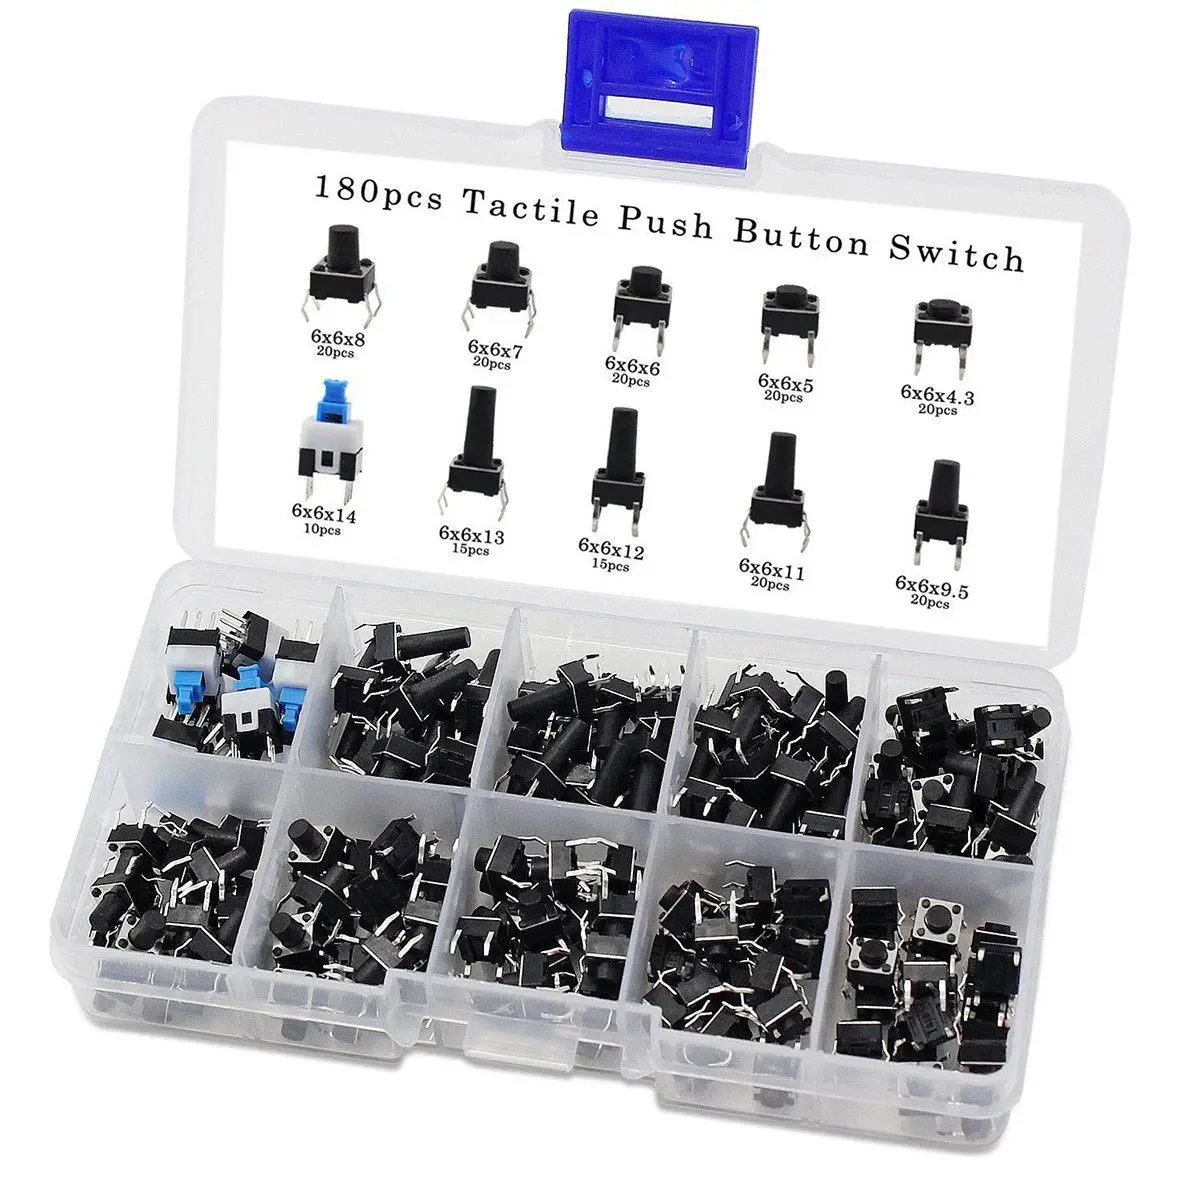 

BHTS-10 kinds Values 180PCS Tactile Push Button Switch micro-trigger Mini Momentary Tact Assortment